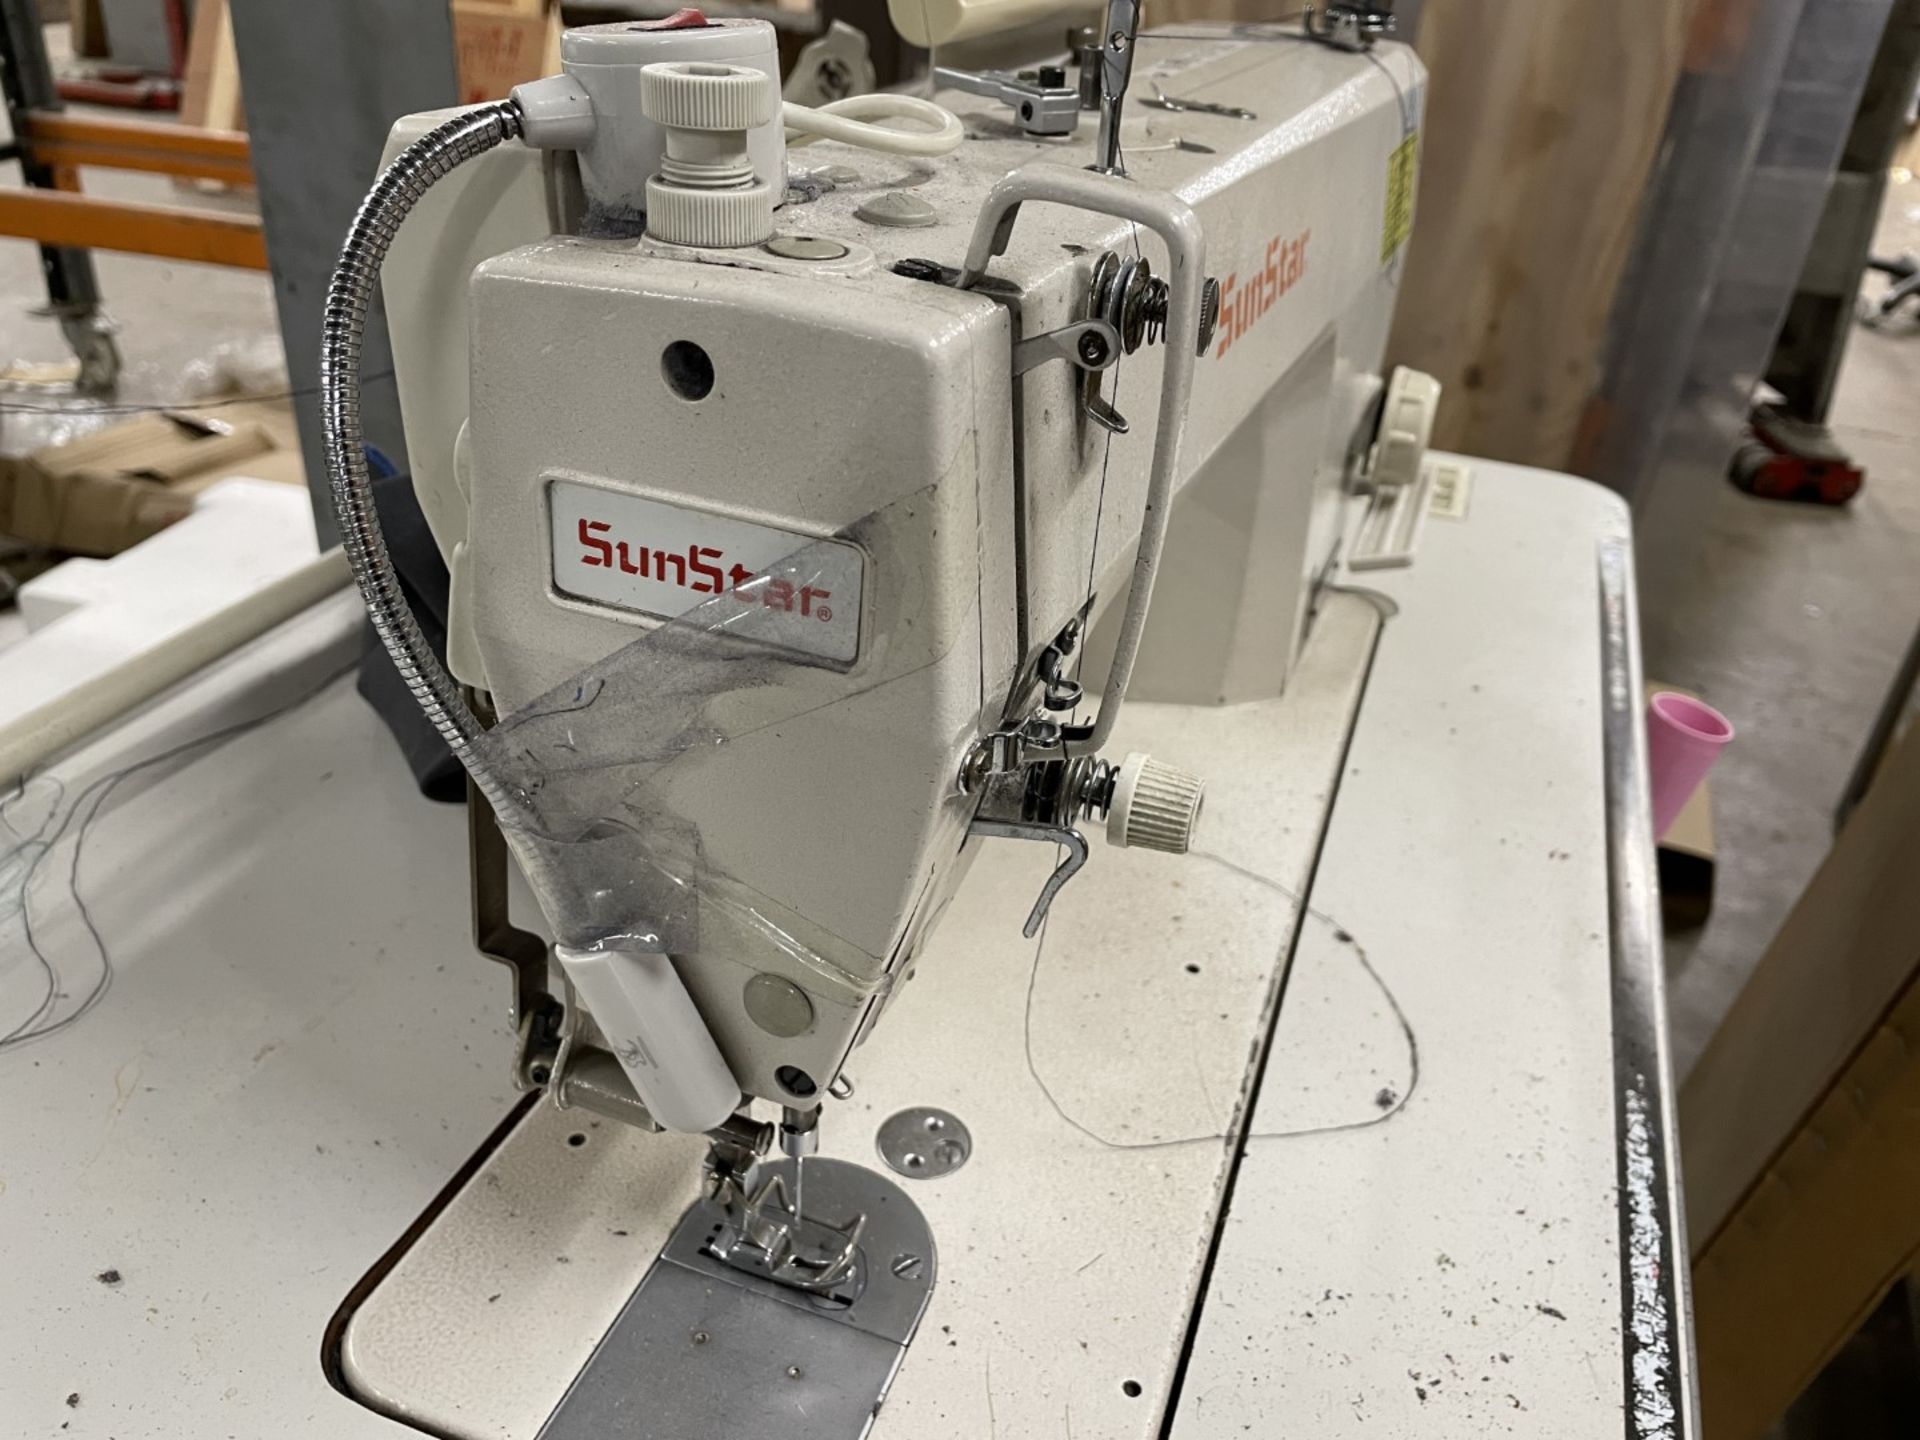 1 x Sunstar KM2300 UMG Single Needle Double Lockstitch Industrial Sewing Machine With Table - Image 10 of 24